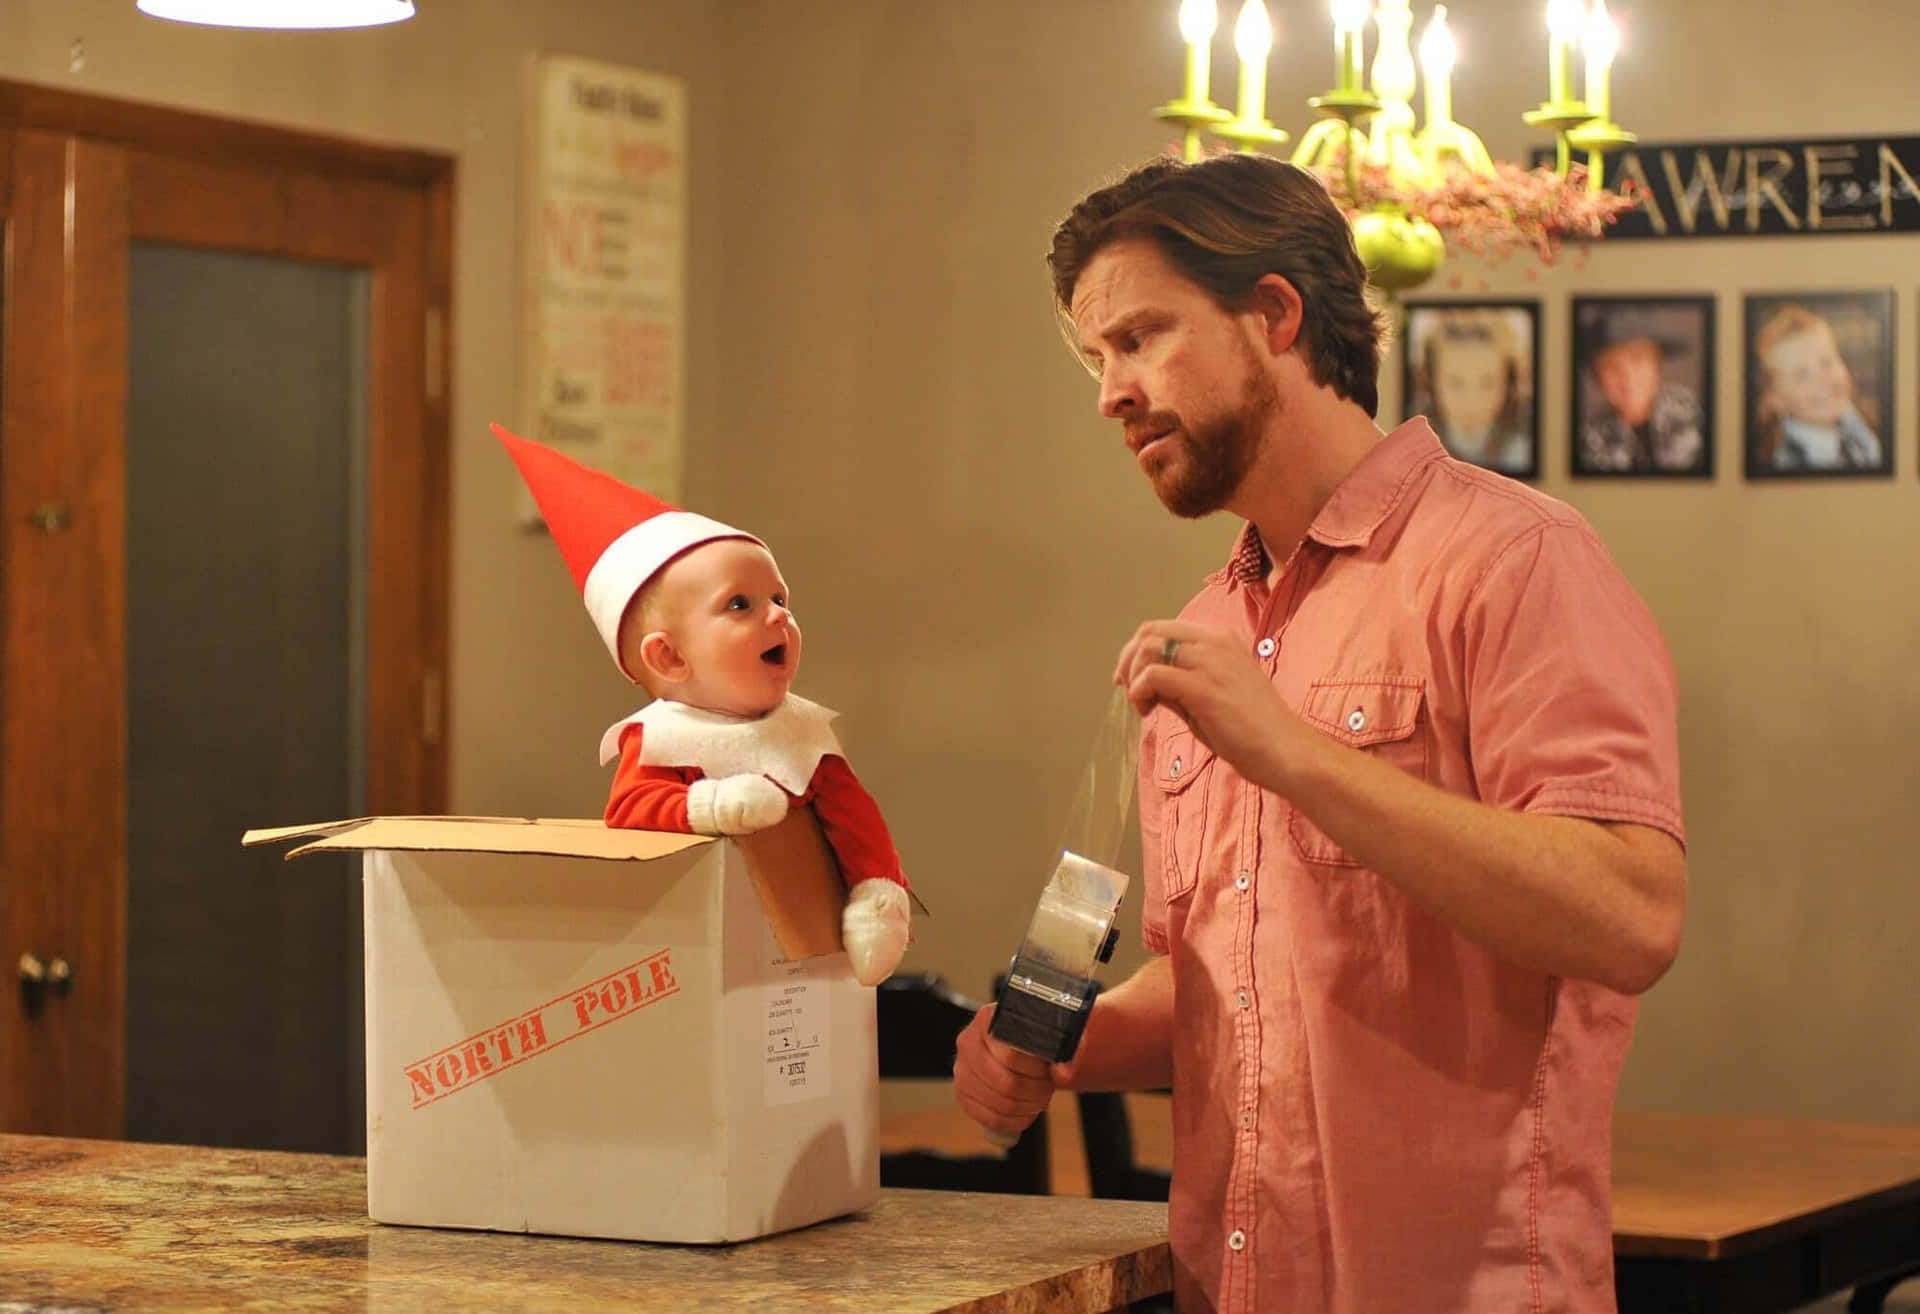 A Man Dressed As An Elf Is Holding A Baby In A Box